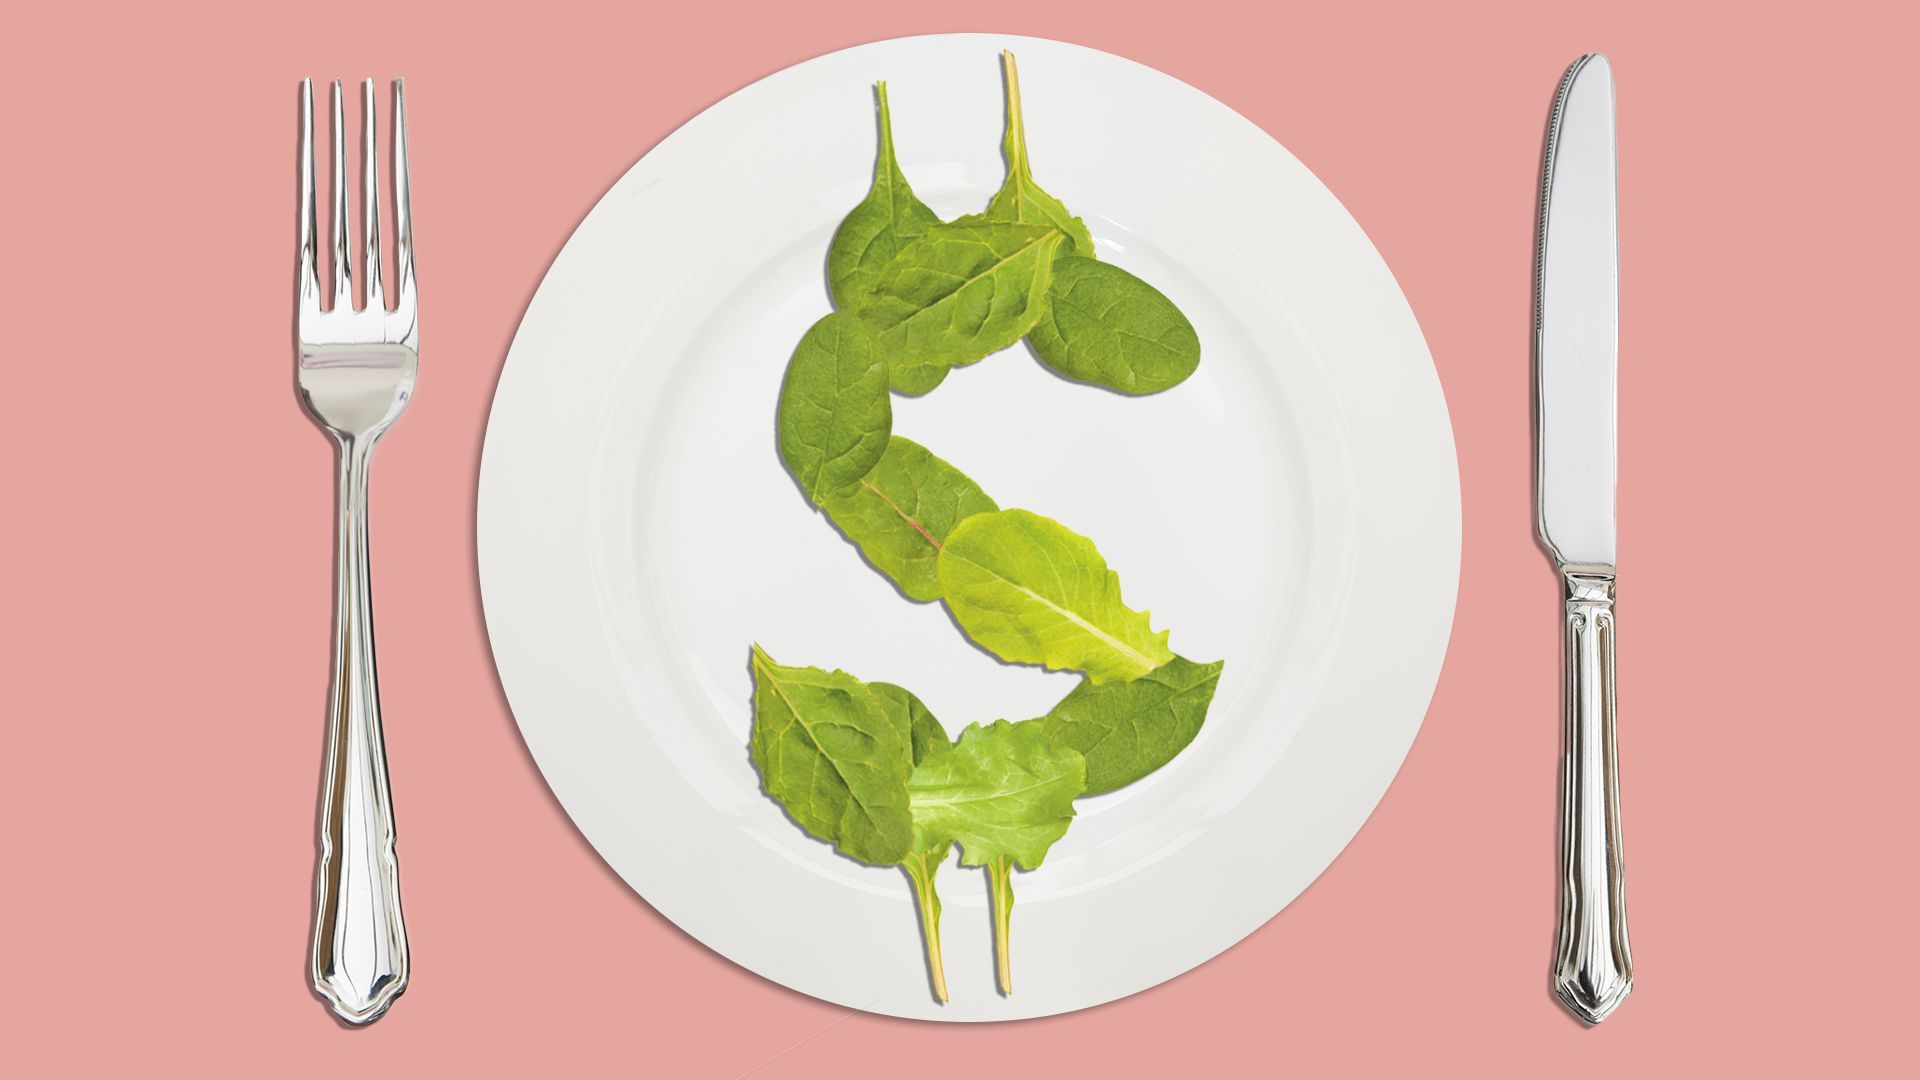 Illustration of salad in the shape of a dollar sign on a plate.